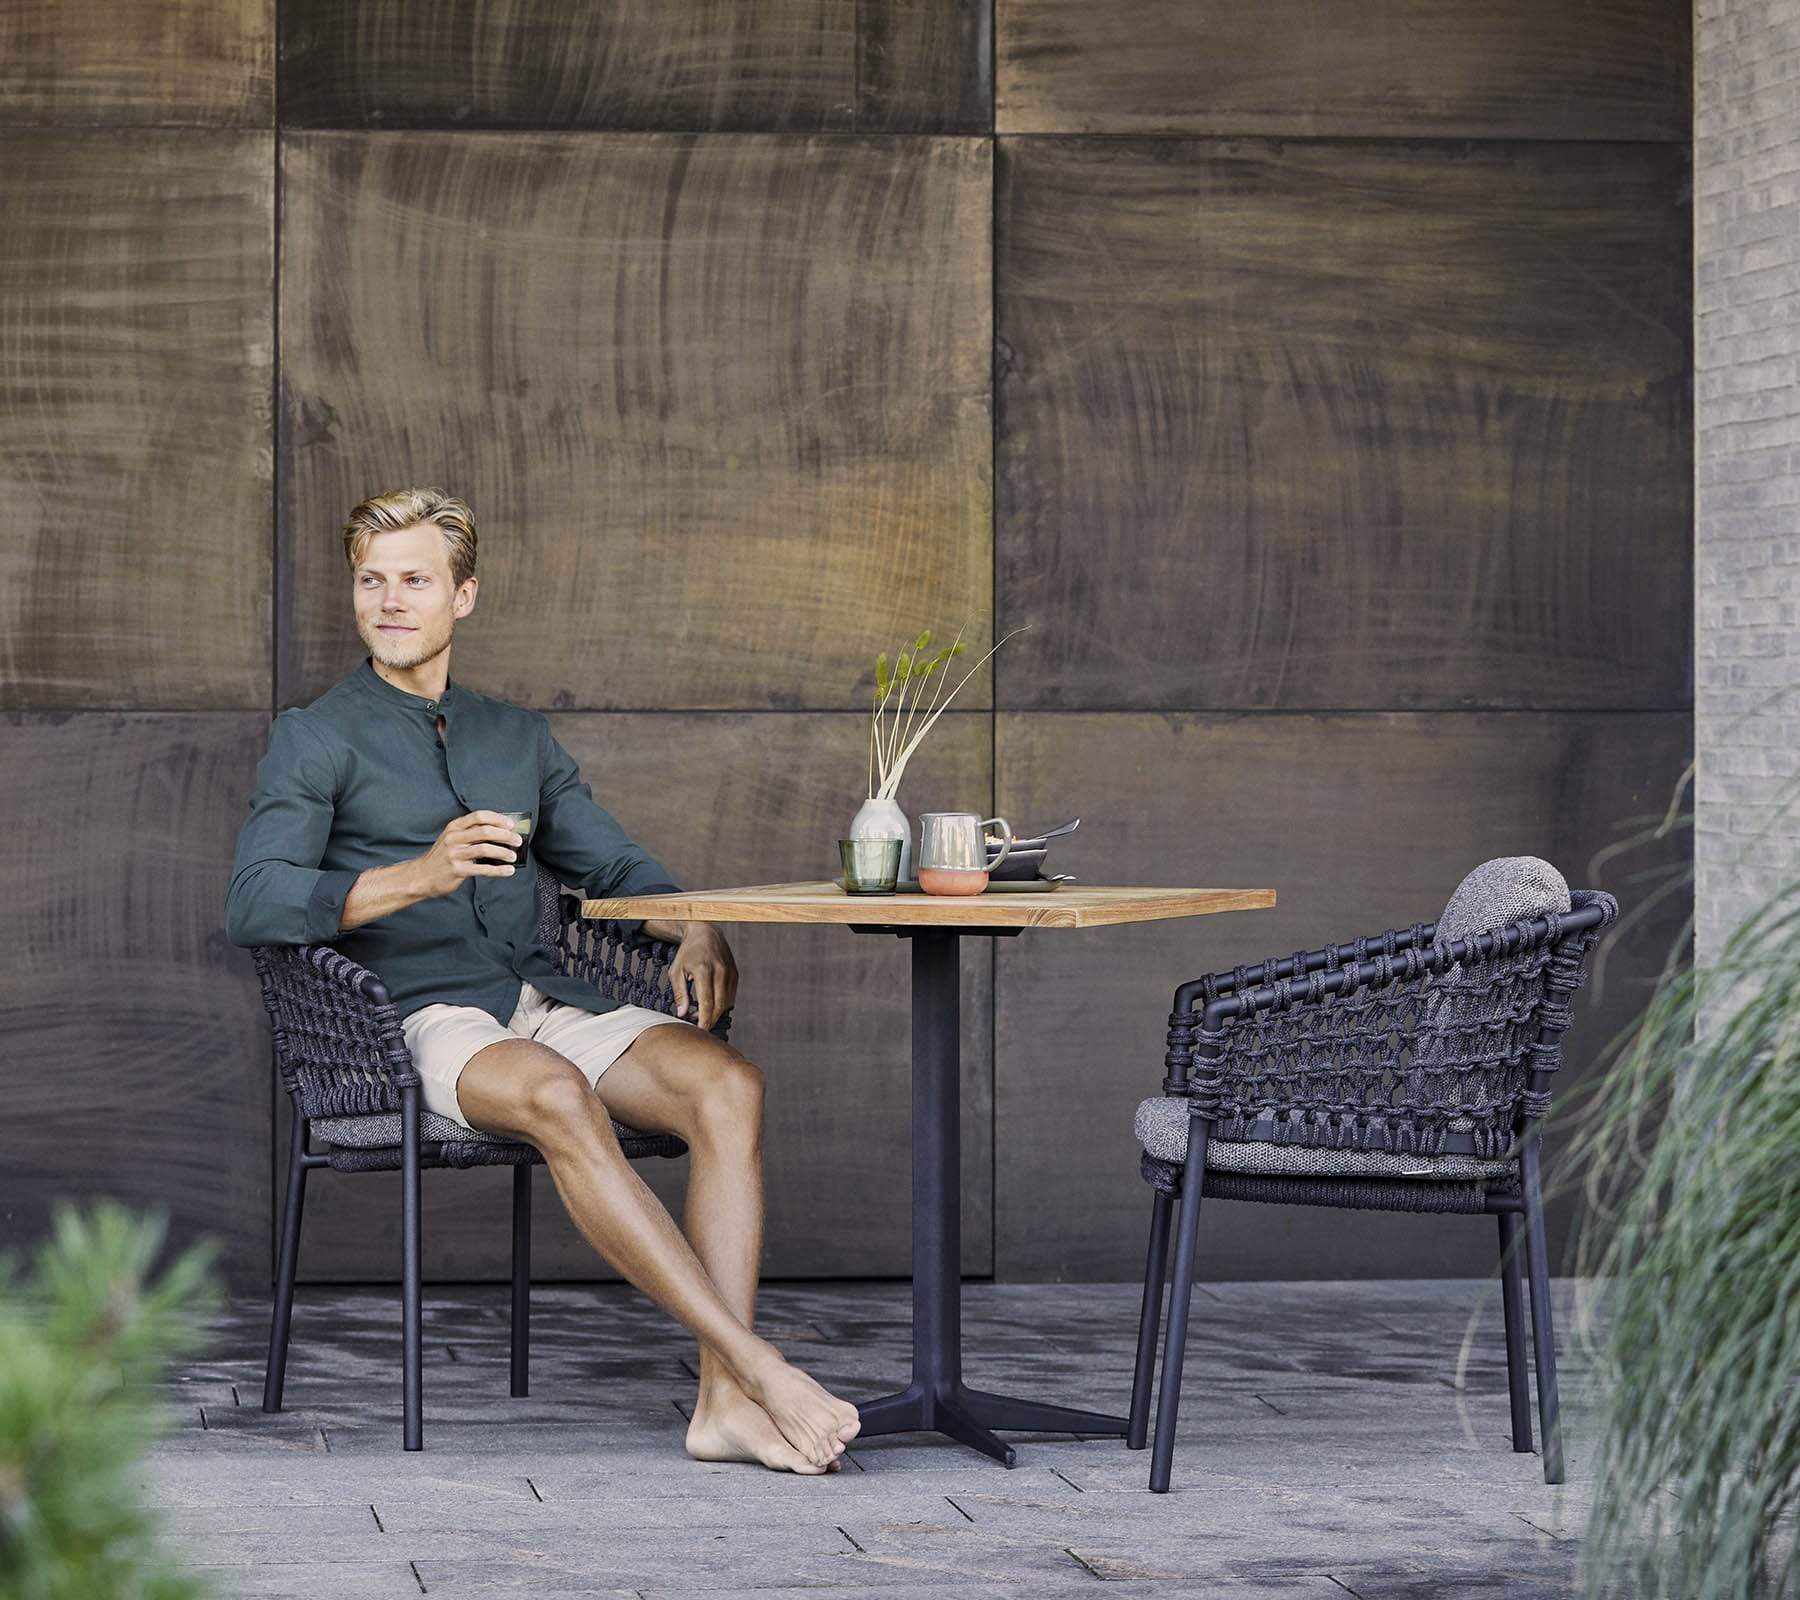 Boxhill's Drop Square Outdoor Cafe Table Lava Grey Base Teak Top lifestyle image with 2 dining chairs and a man sitting down holding a glass of coffee